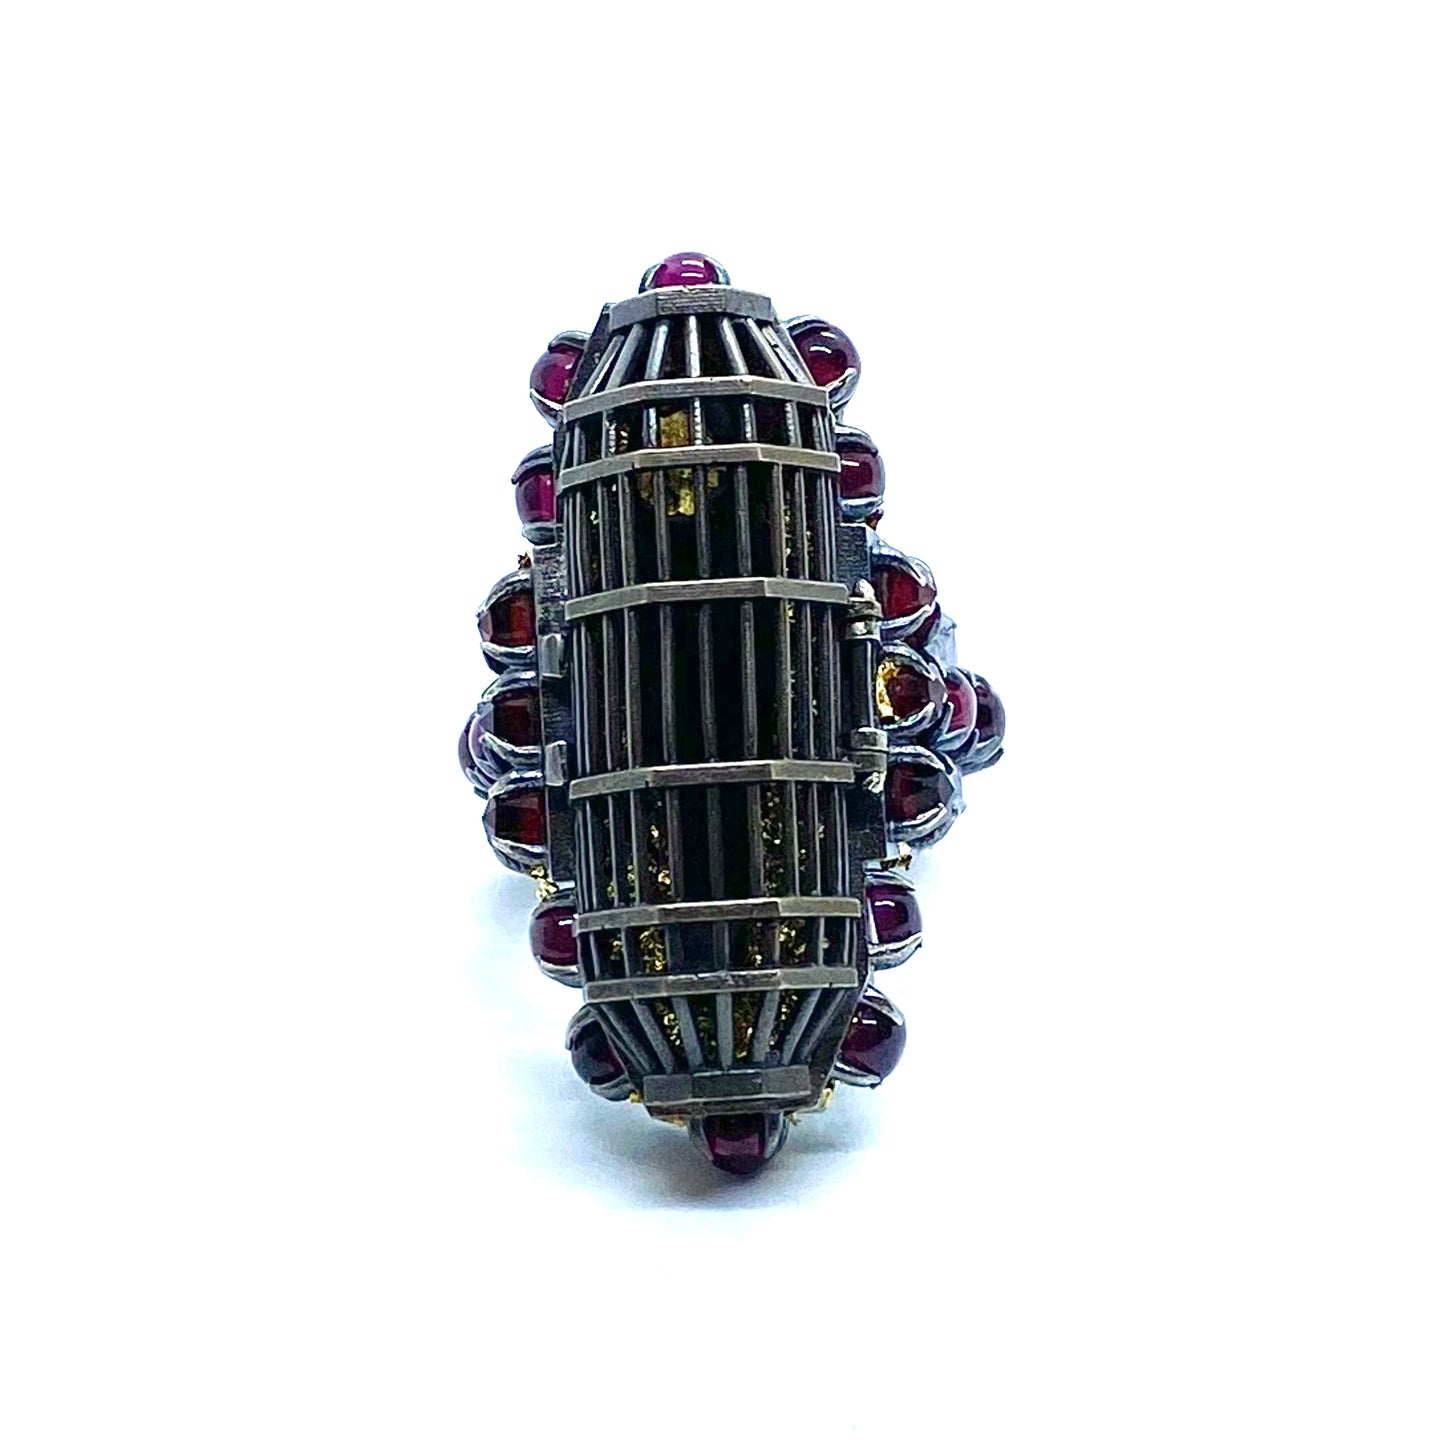 Carthusian’s Soul Carved Black Coral Monk Figure Iron Maiden Ring in Sterling Silver With Garnets and 23kt Gold leaf